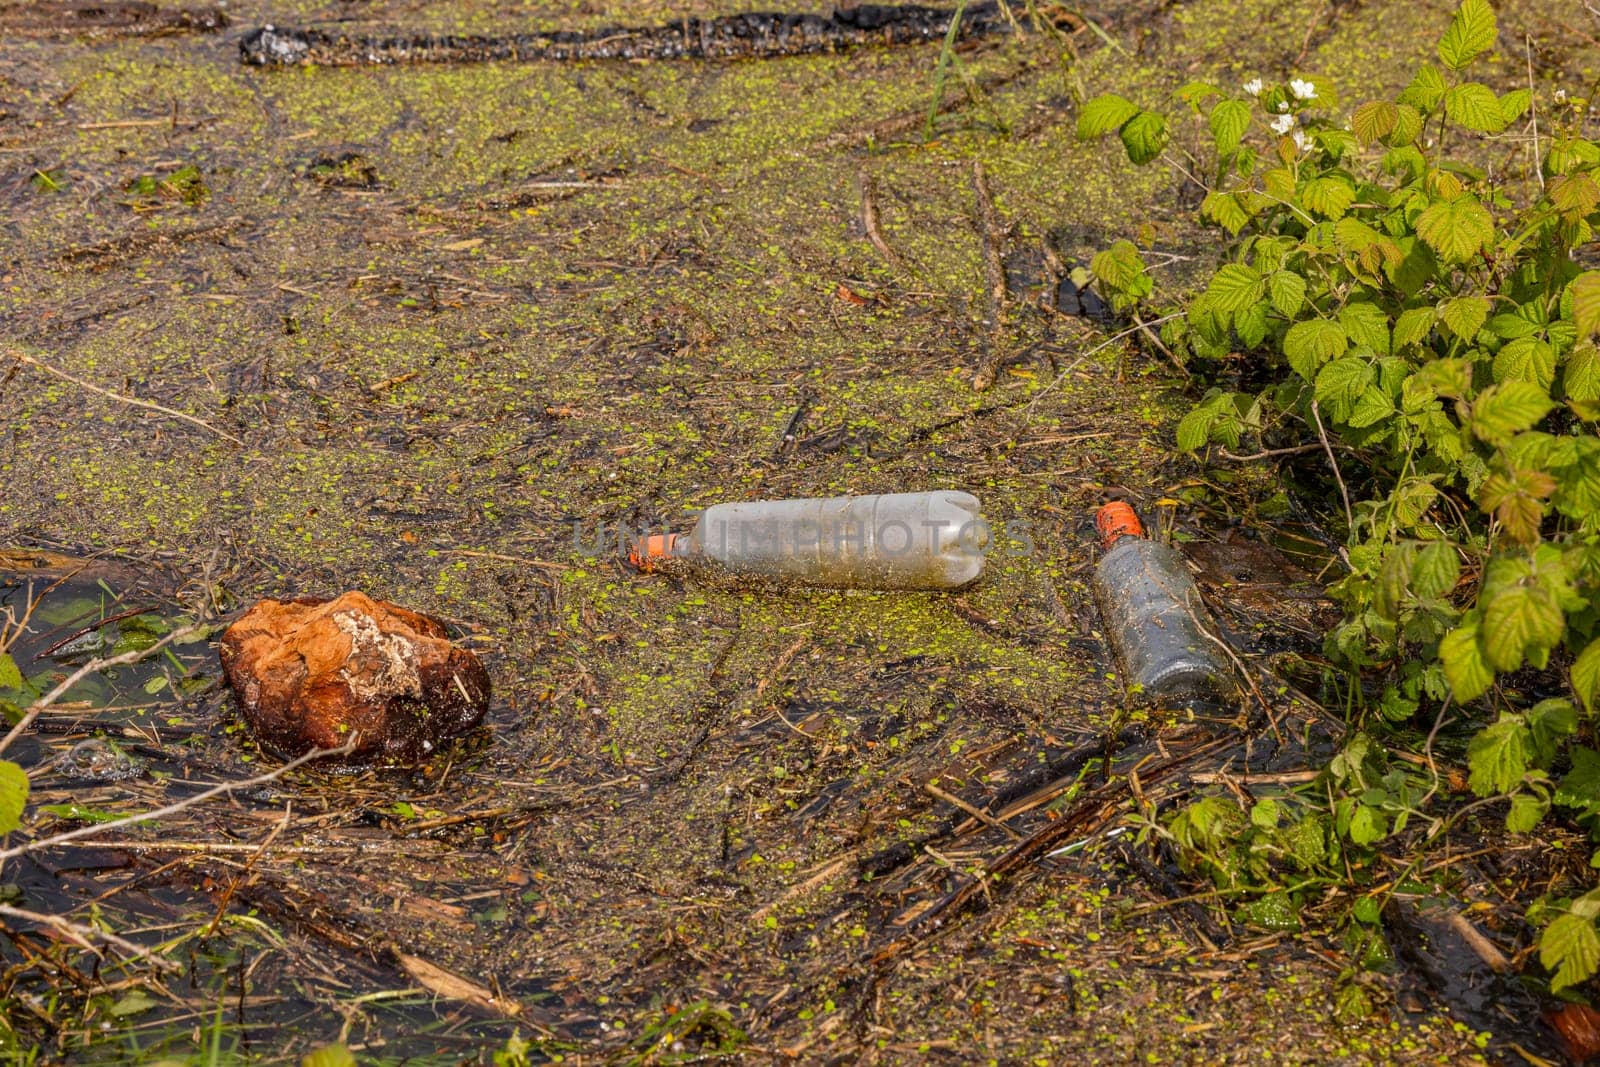 A glass bottle and a plastic bottle pollute as garbage the shore of a body of water in nature